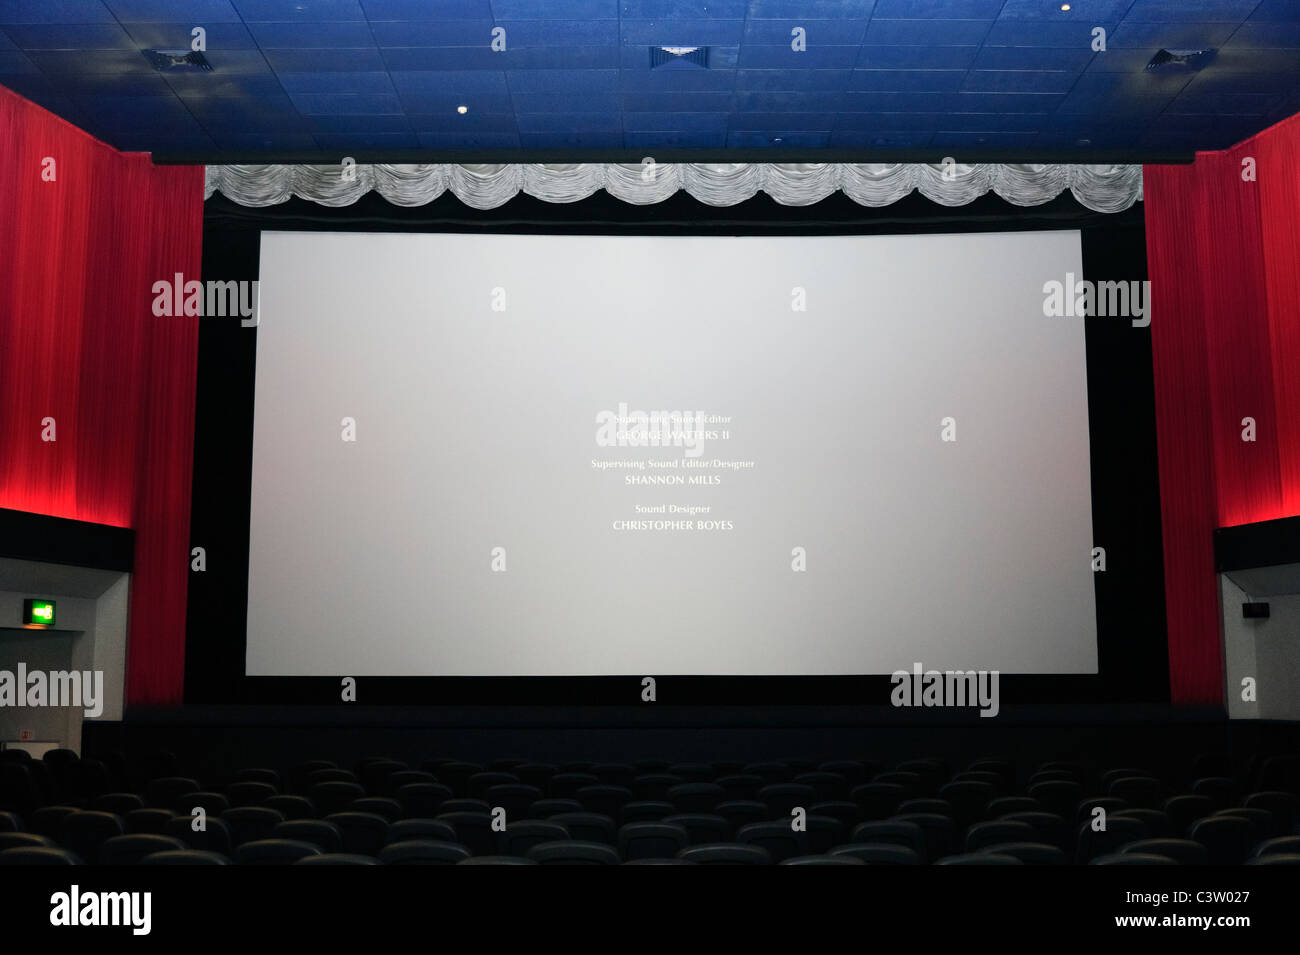 Interior of cinema showing empty screen with rolling credits at the end of a film, Gloucester, UK. Stock Photo